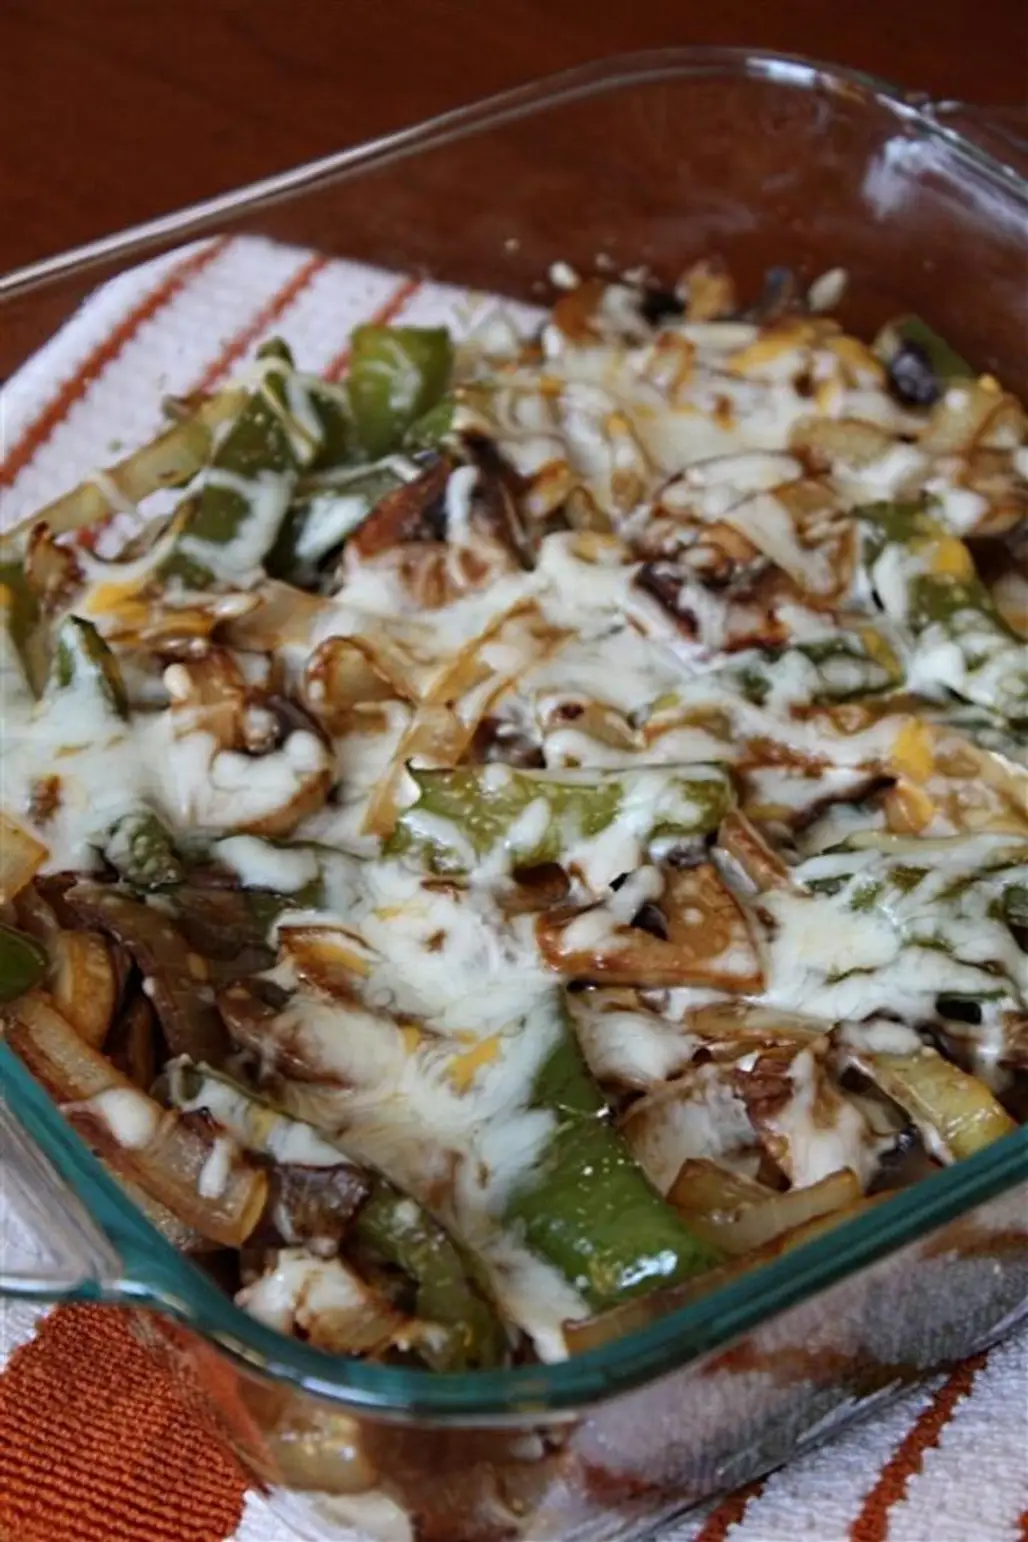 Smothered Chicken with Onions, Mushrooms, Bell Peppers, and Mozzarella